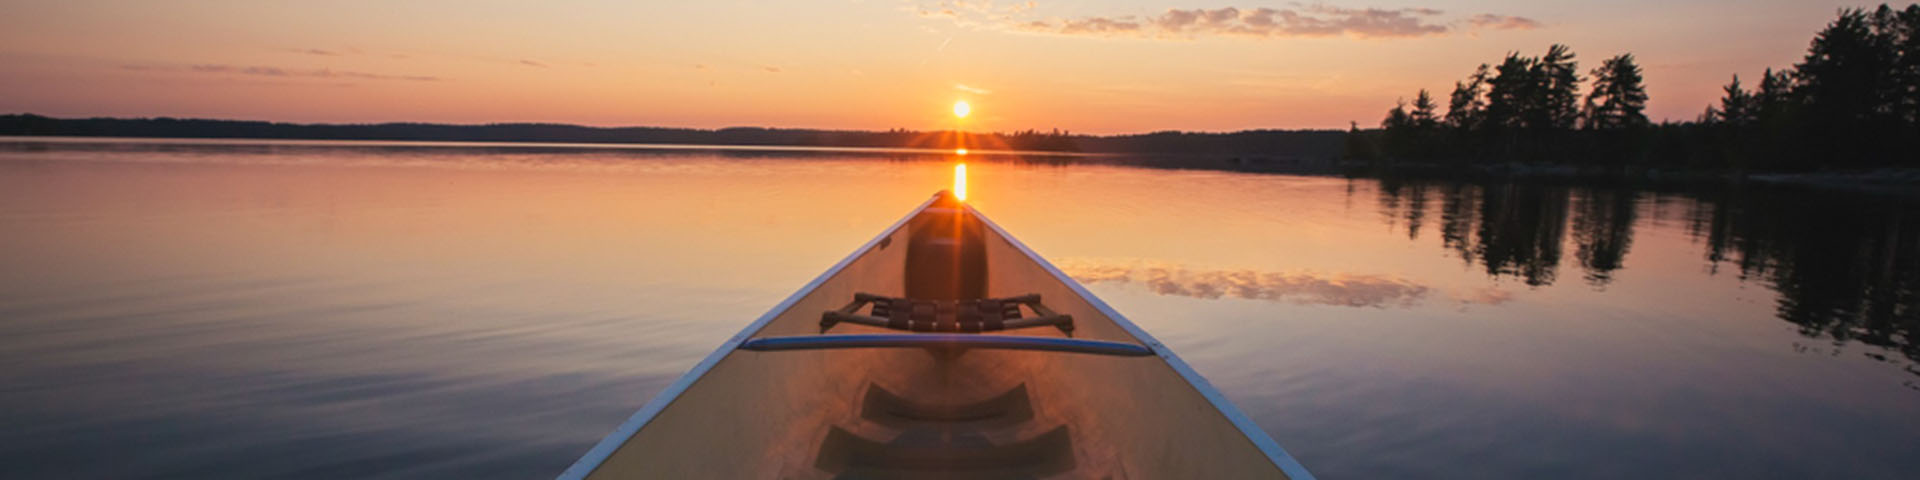 Equipment Rental for your Quetico Eco-Adventure by Voyageur Wilderness Programme - Image 137